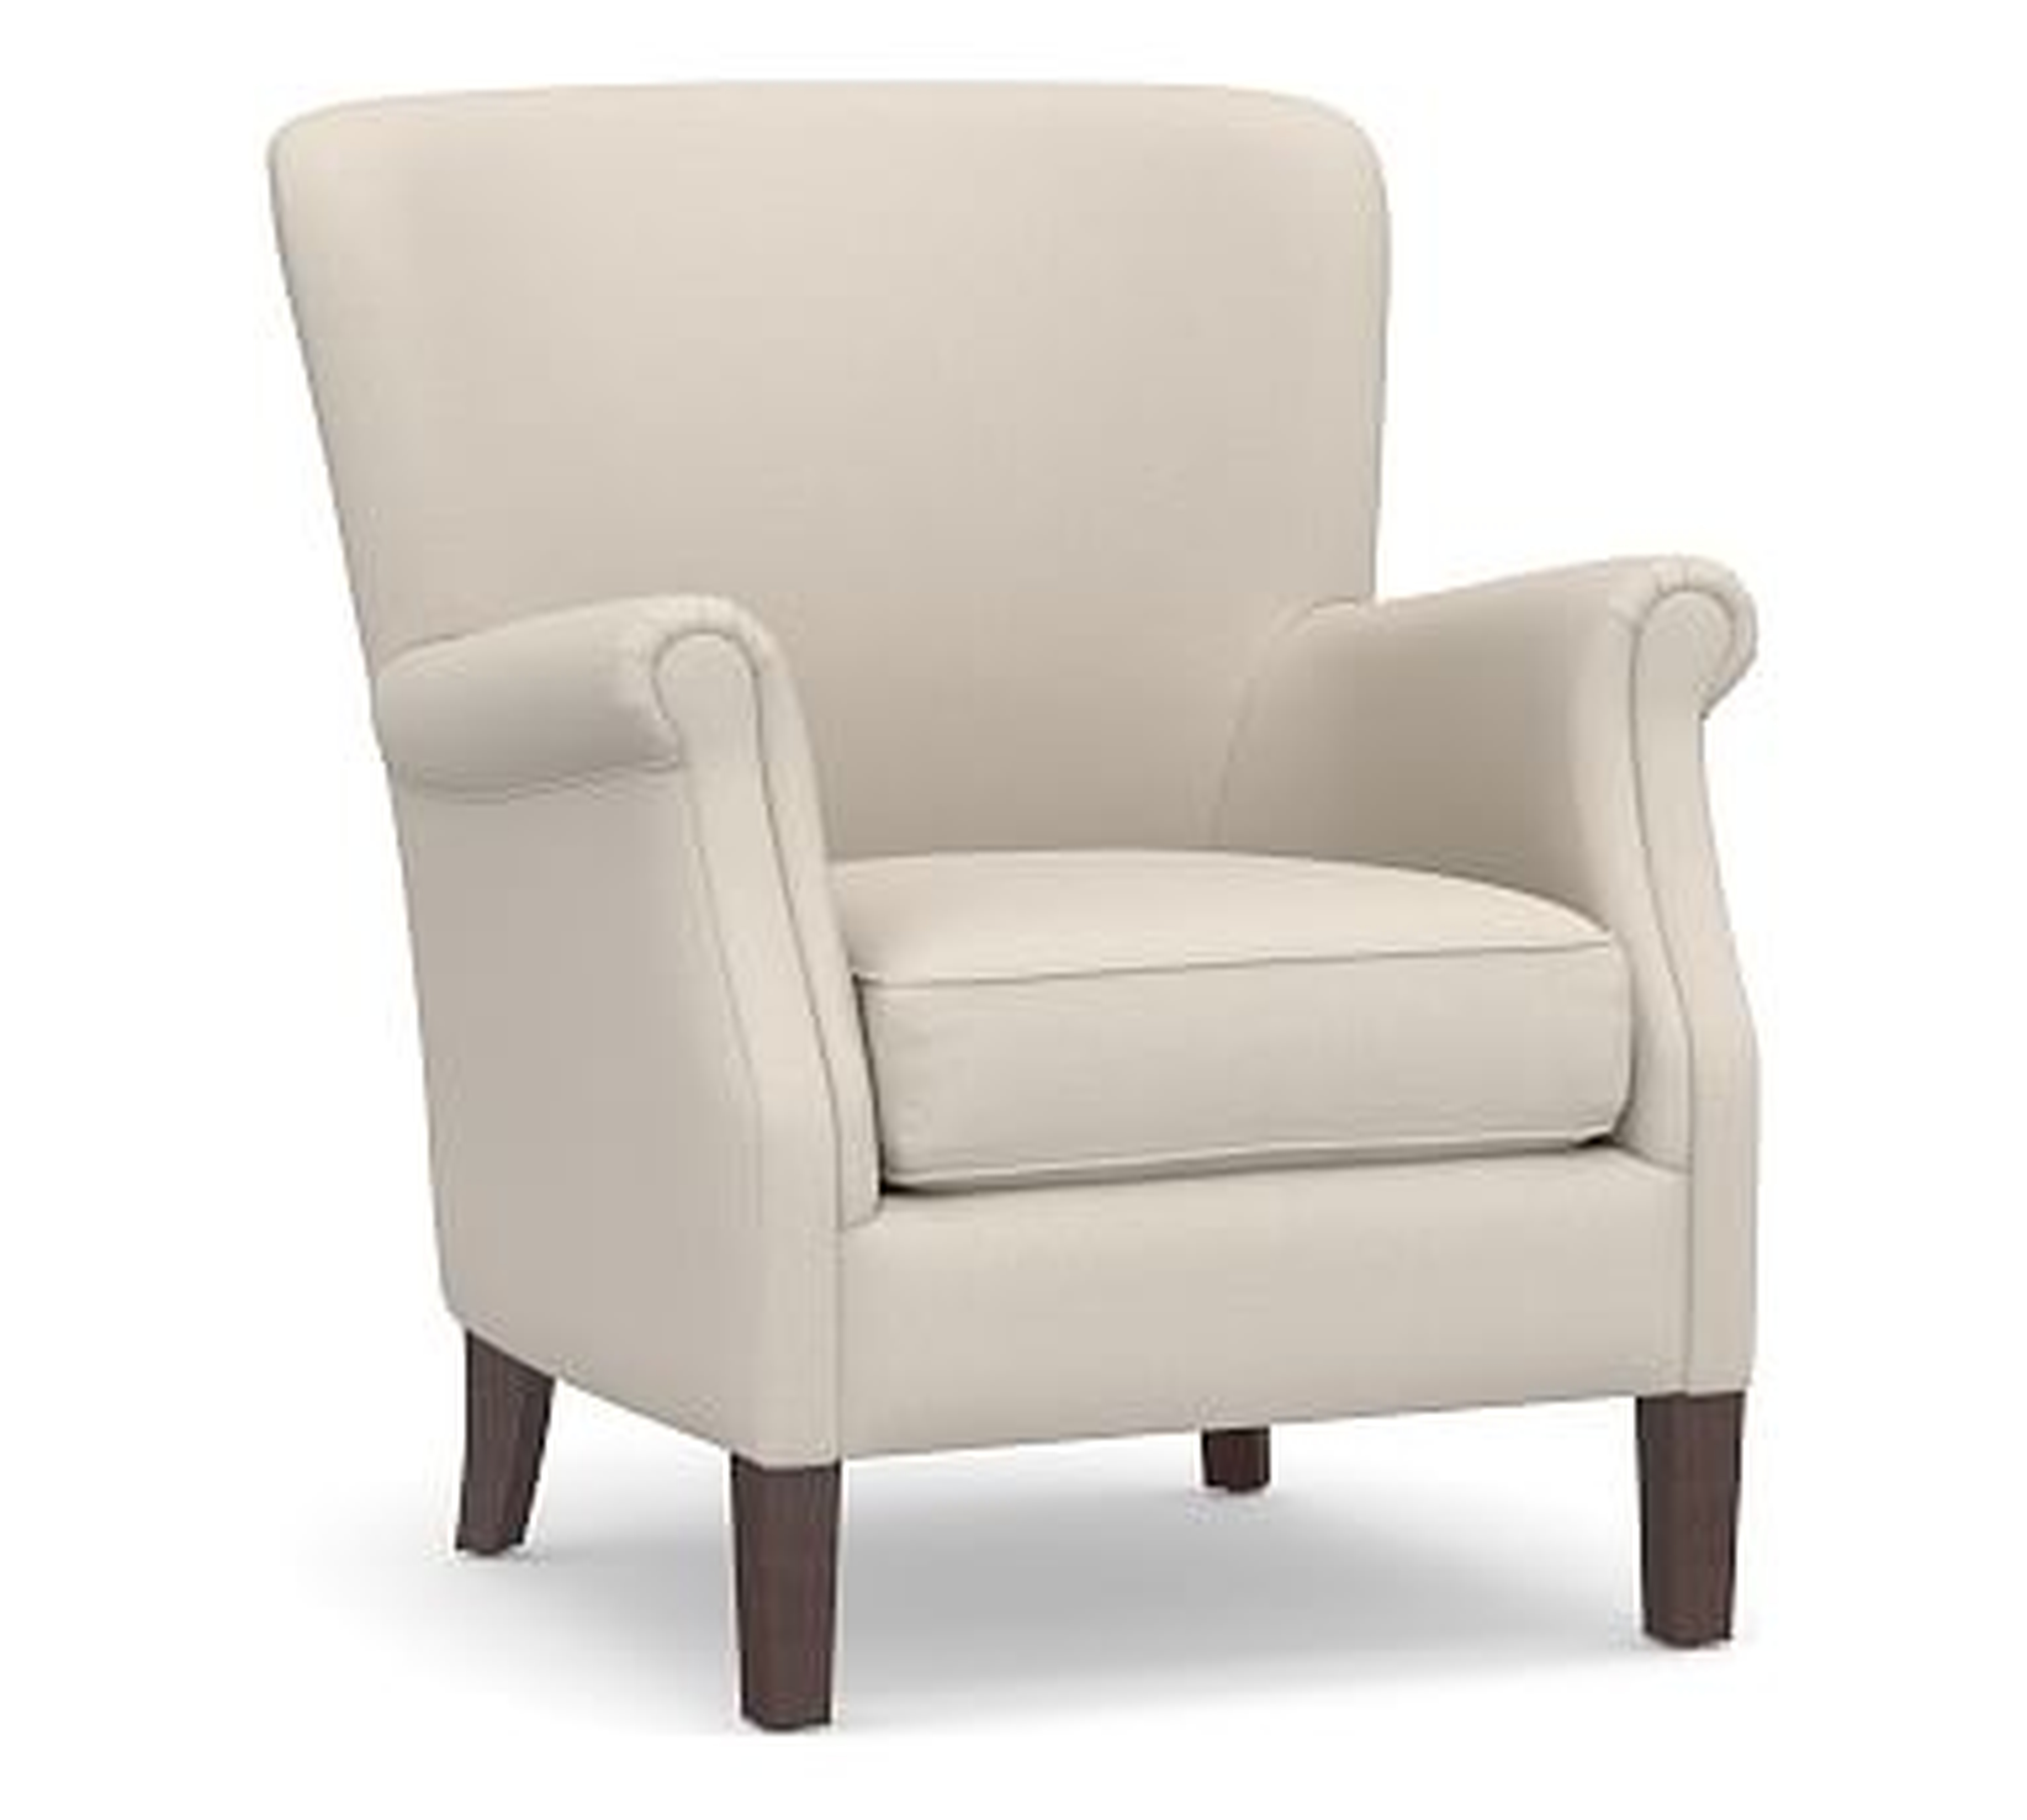 SoMa Minna Upholstered Armchair, Polyester Wrapped Cushions, Performance Brushed Basketweave Oatmeal - Pottery Barn